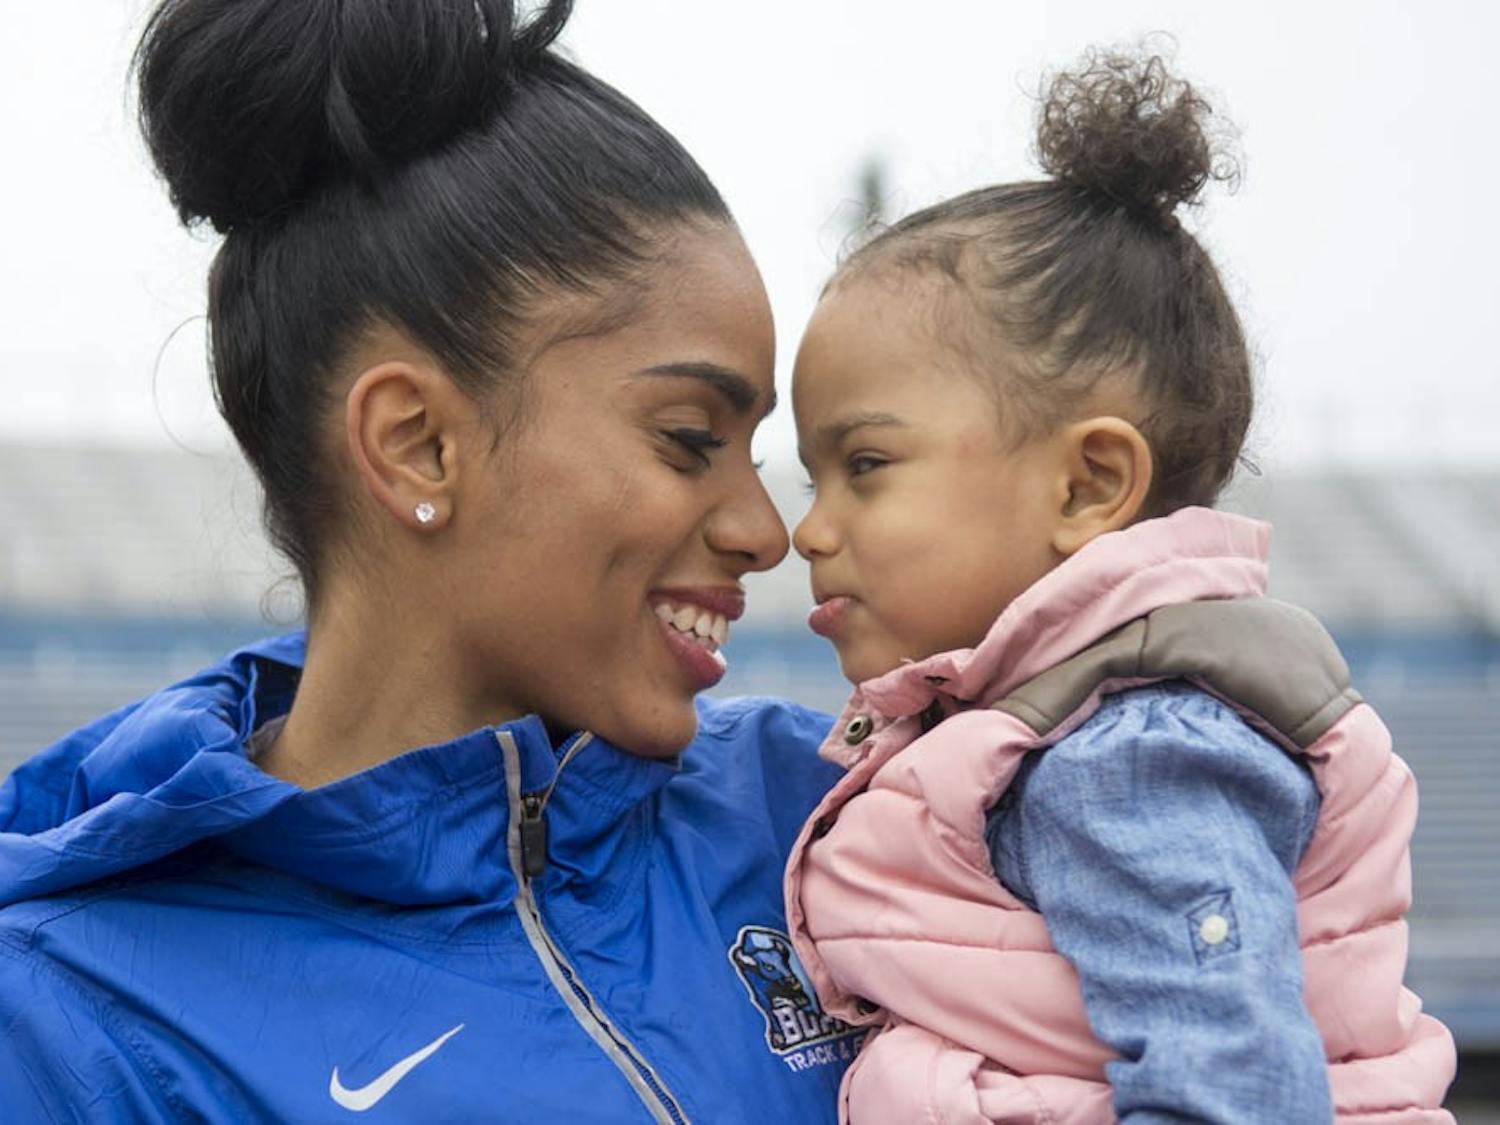 Asher Beasley, a hurdler on the women's track and field team, gave birth to her daughter Jace on May 9, 2014. Since then, she has come back to UB even stronger.